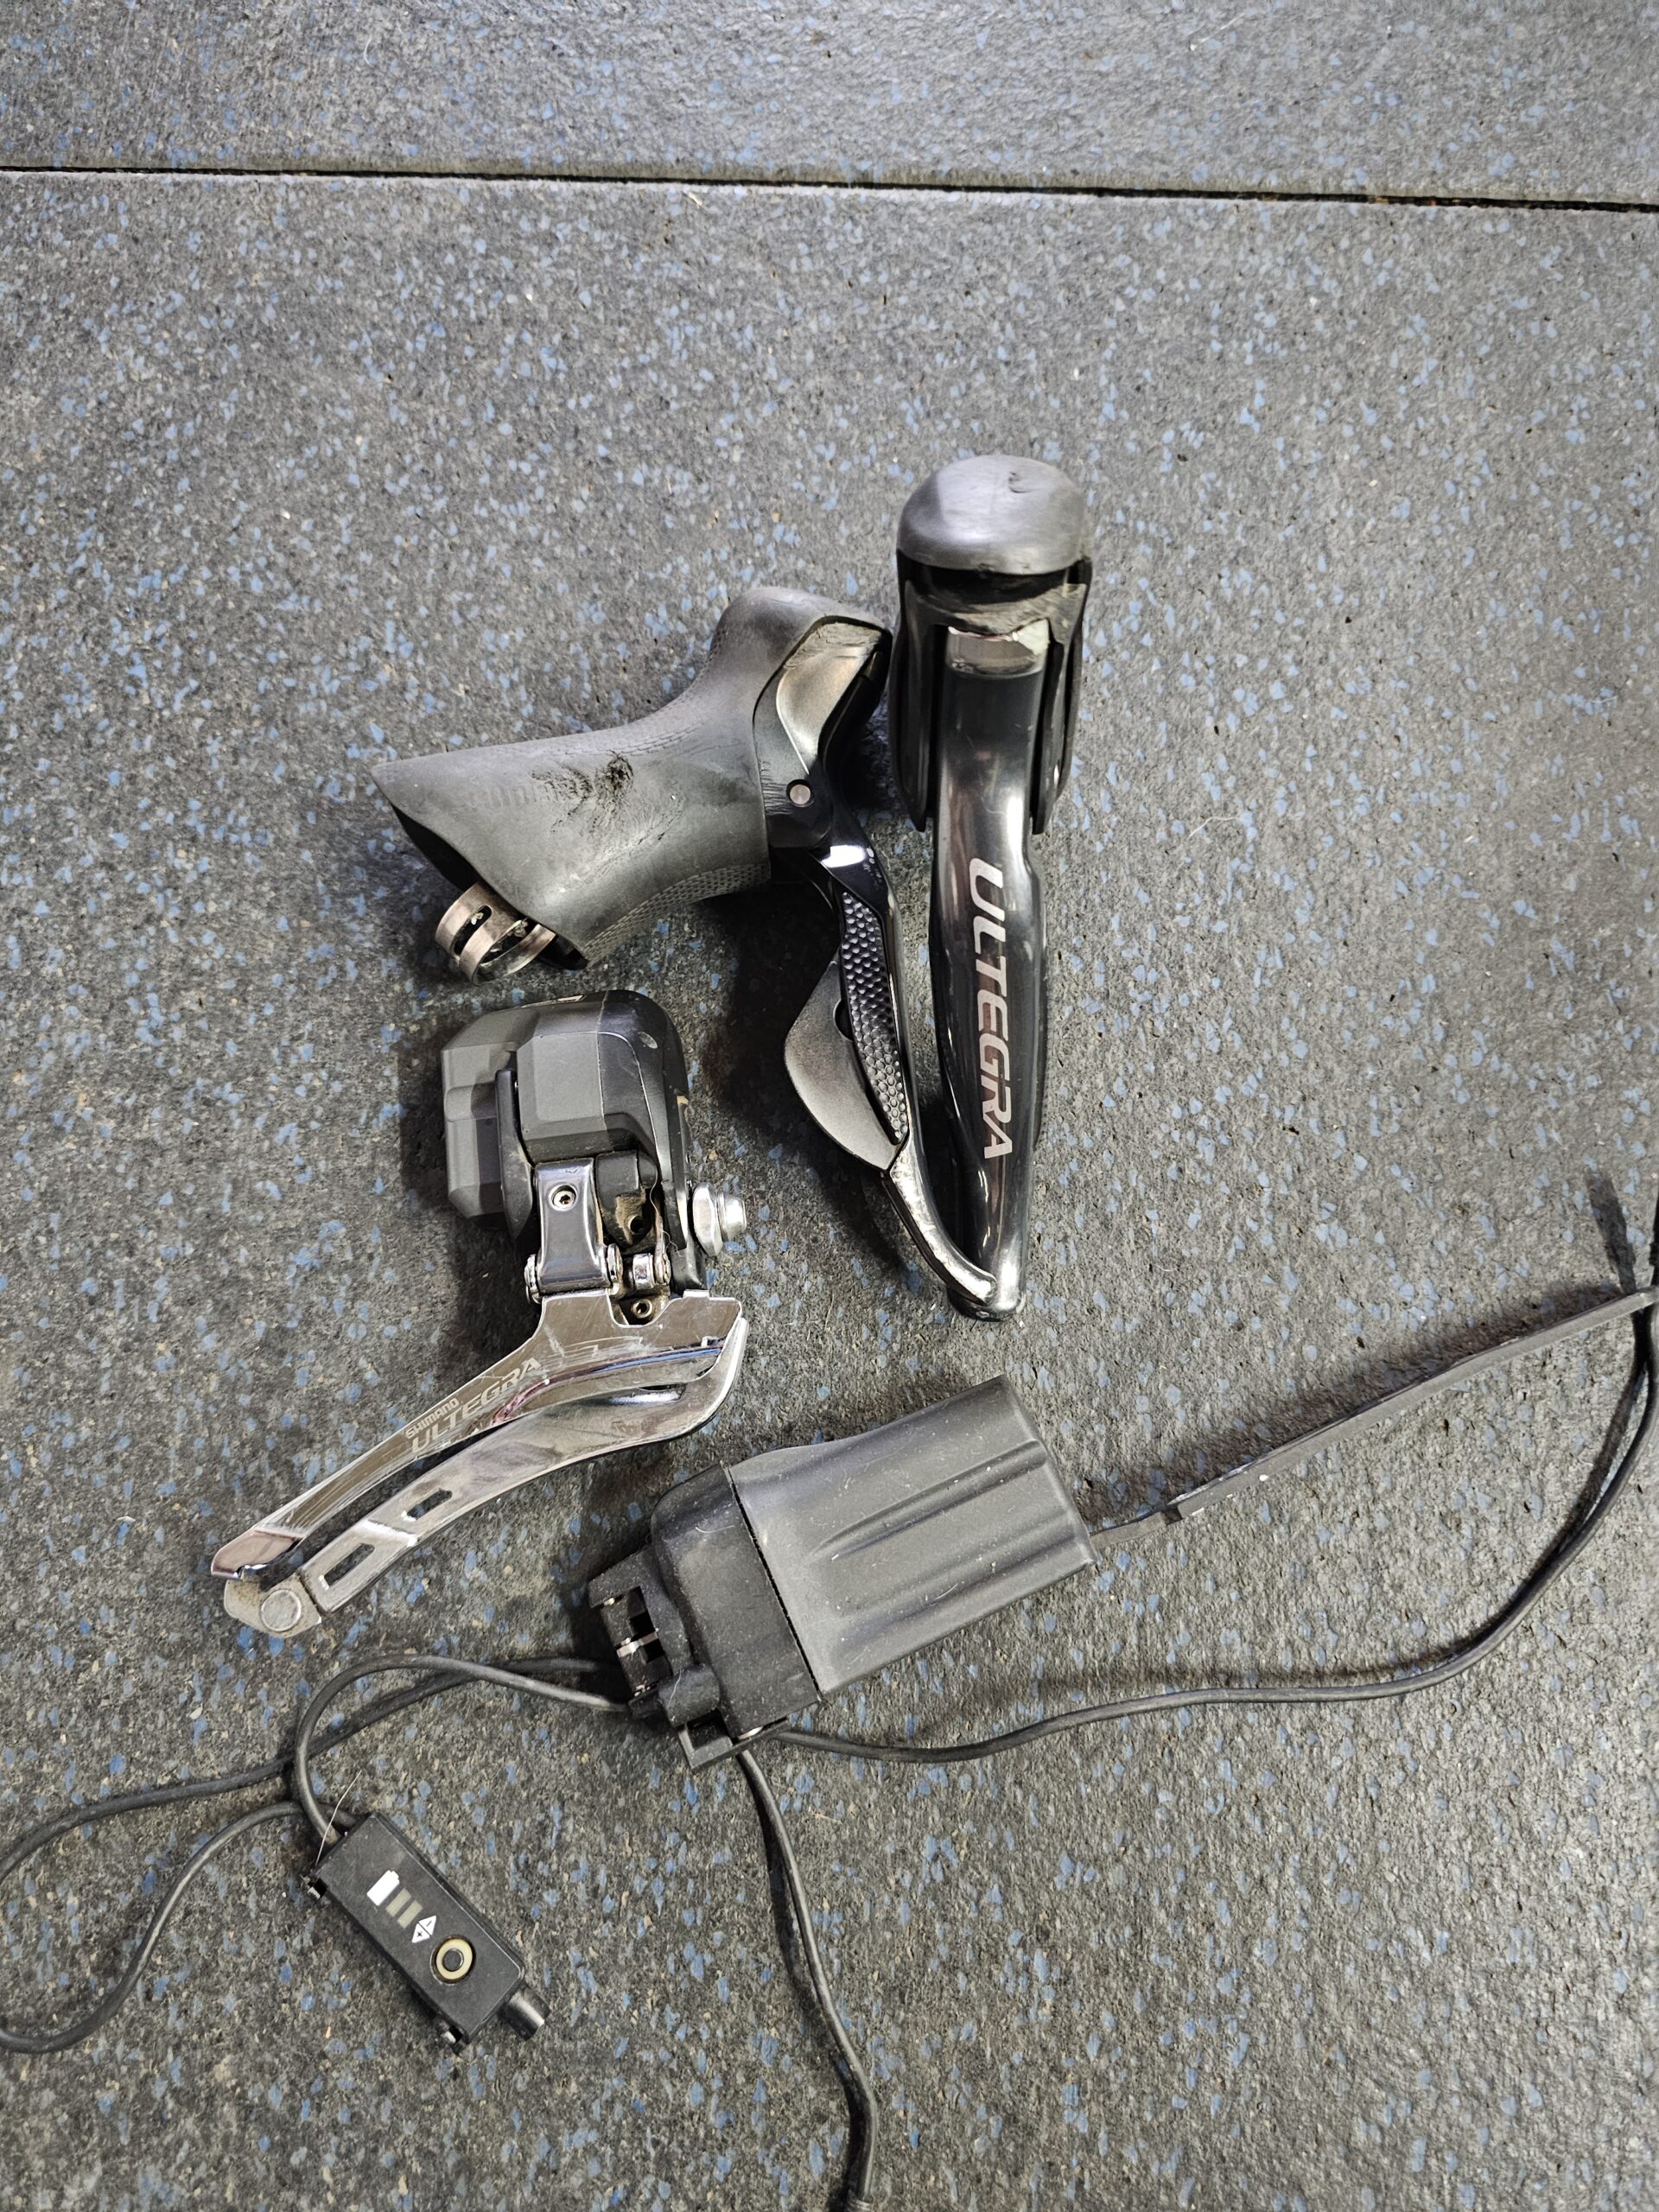 Old Ultegra but maybe useful, Postage + a donation to charity